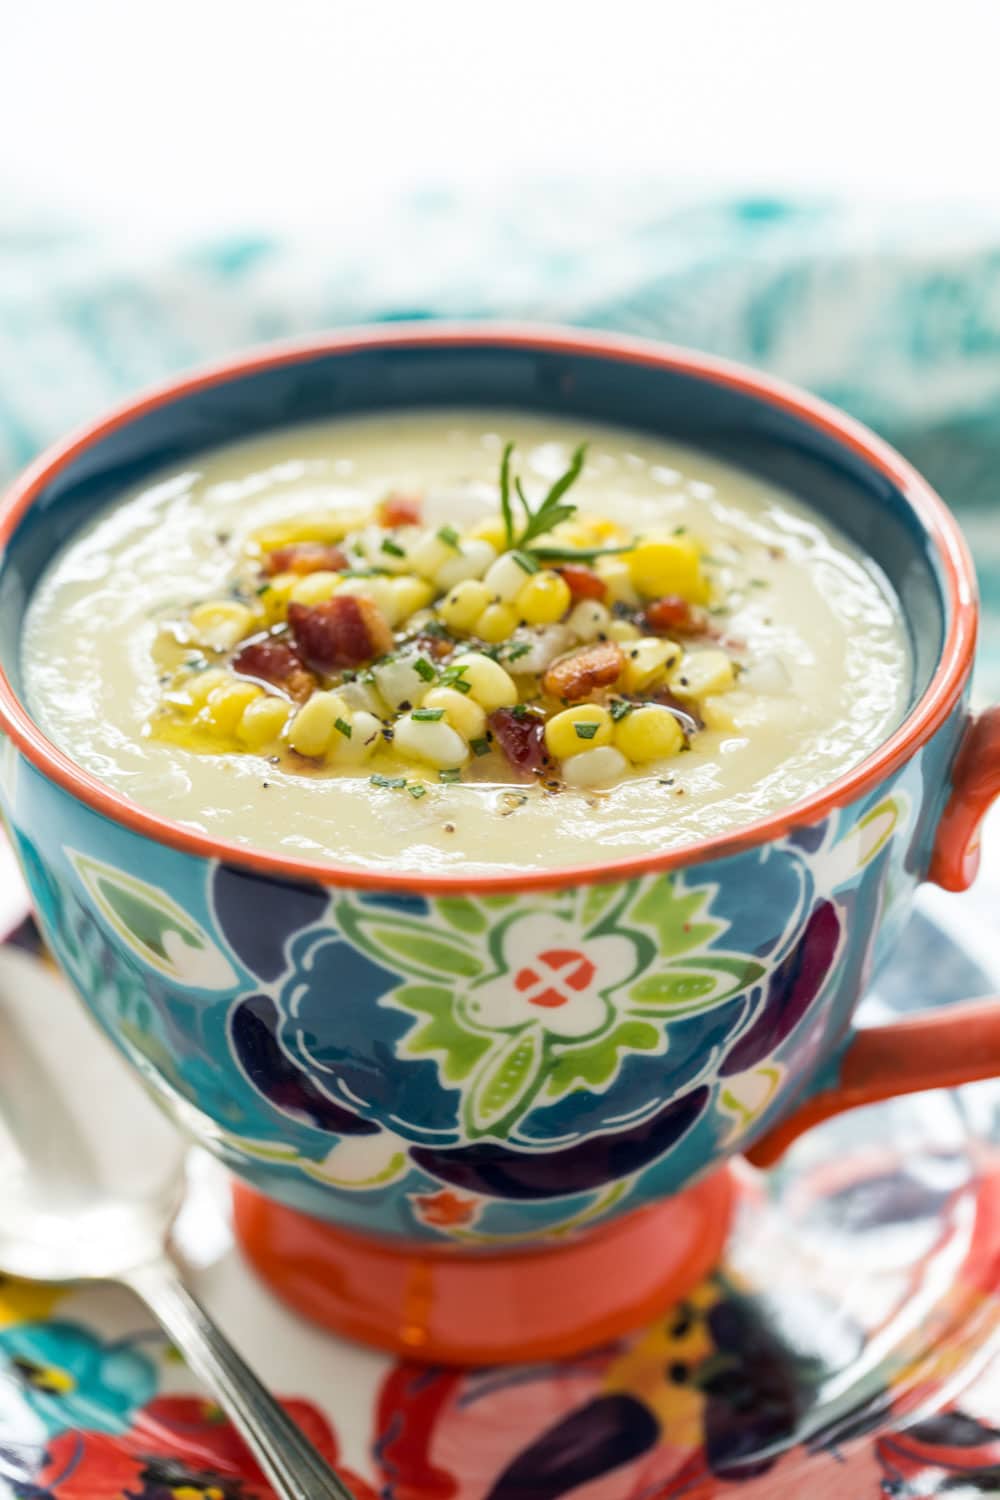 Vertical closeup photo of Fresh Corn Soup in a floral patterned mug and plate.